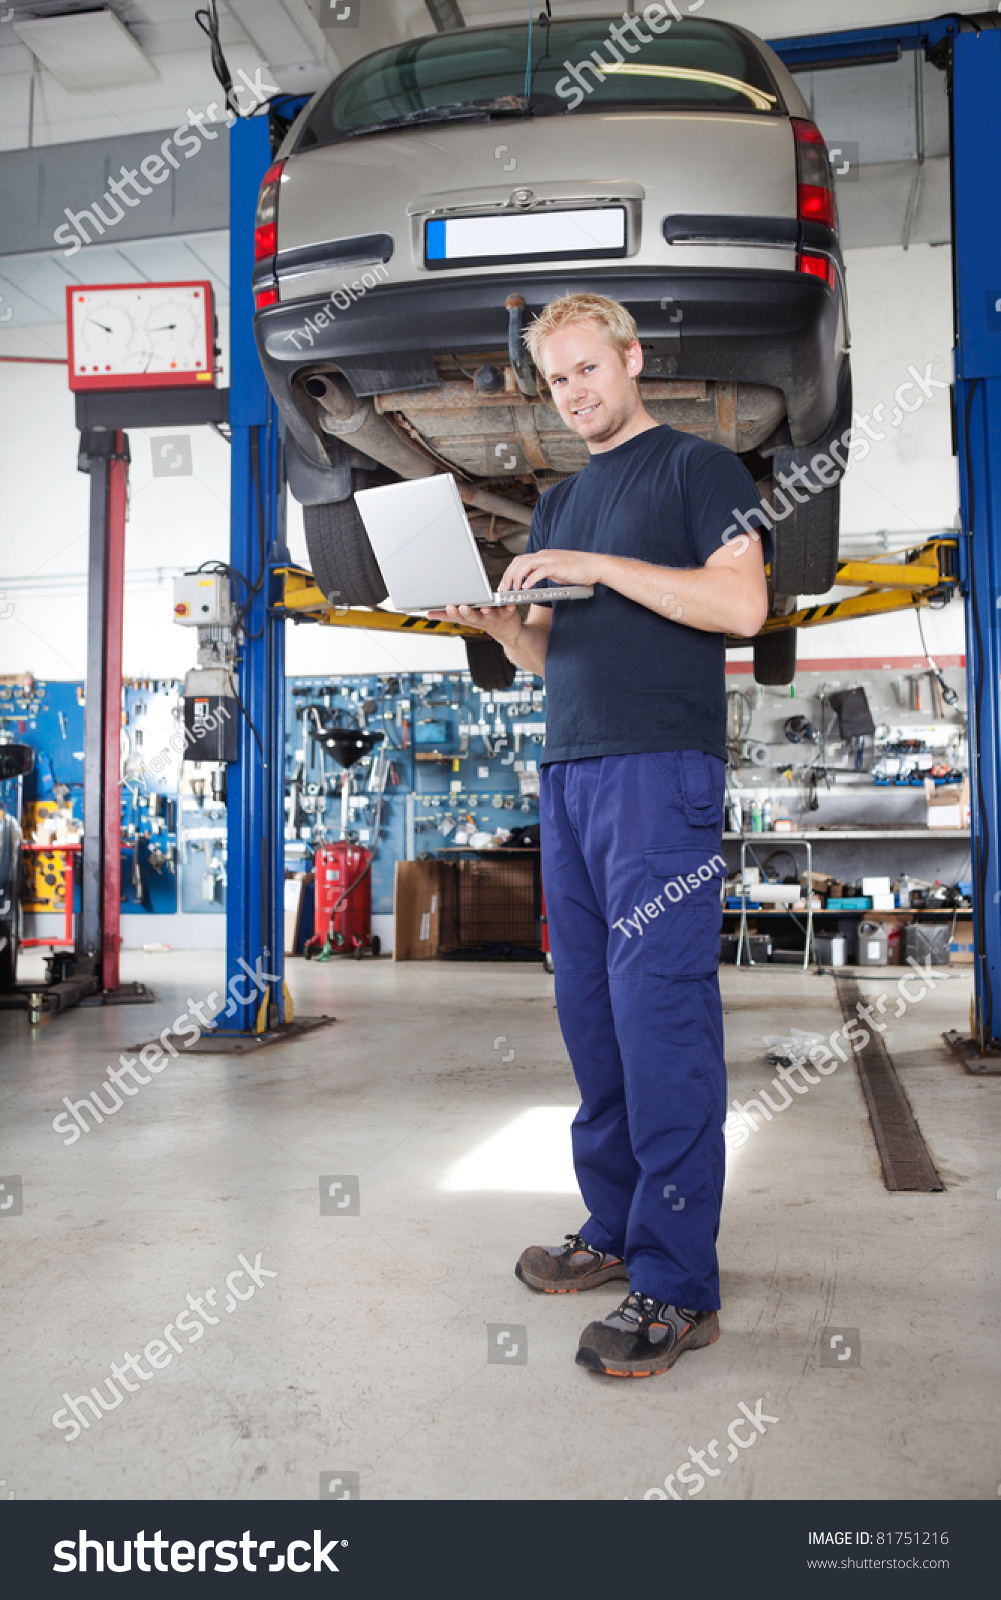 Full length portrait of smiling young mechanic using laptop in his auto repair shop #81751216